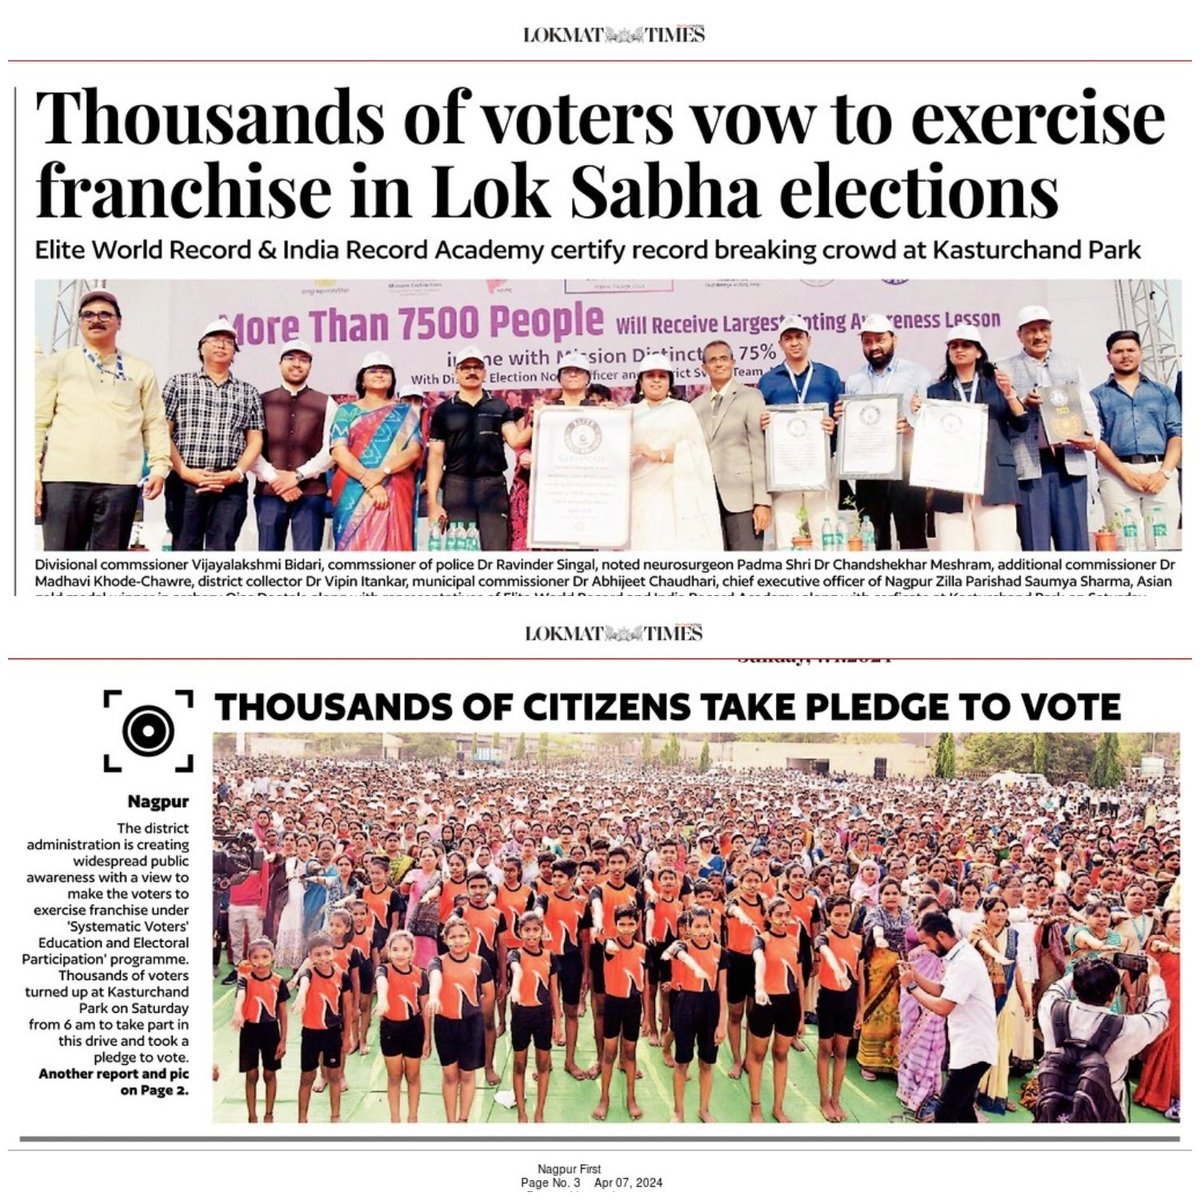 World's largest voters awareness lesson under the SVEEP campaign received encouraging citizens at Kasturchand Park with the witness of rising sun and got certification by Elite World Record. @InfoNagpur @deo_nagpur @CEO_Maharashtra #DeshKaGarv #ChunavKaParv #VOTE #Ecisveep